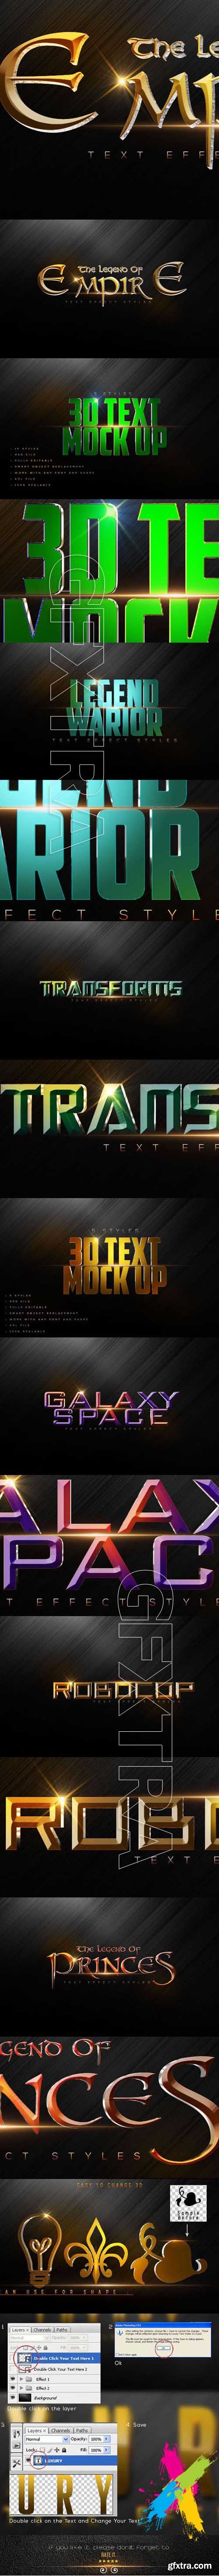 GraphicRiver - 10 New Text Styles A2 20318148